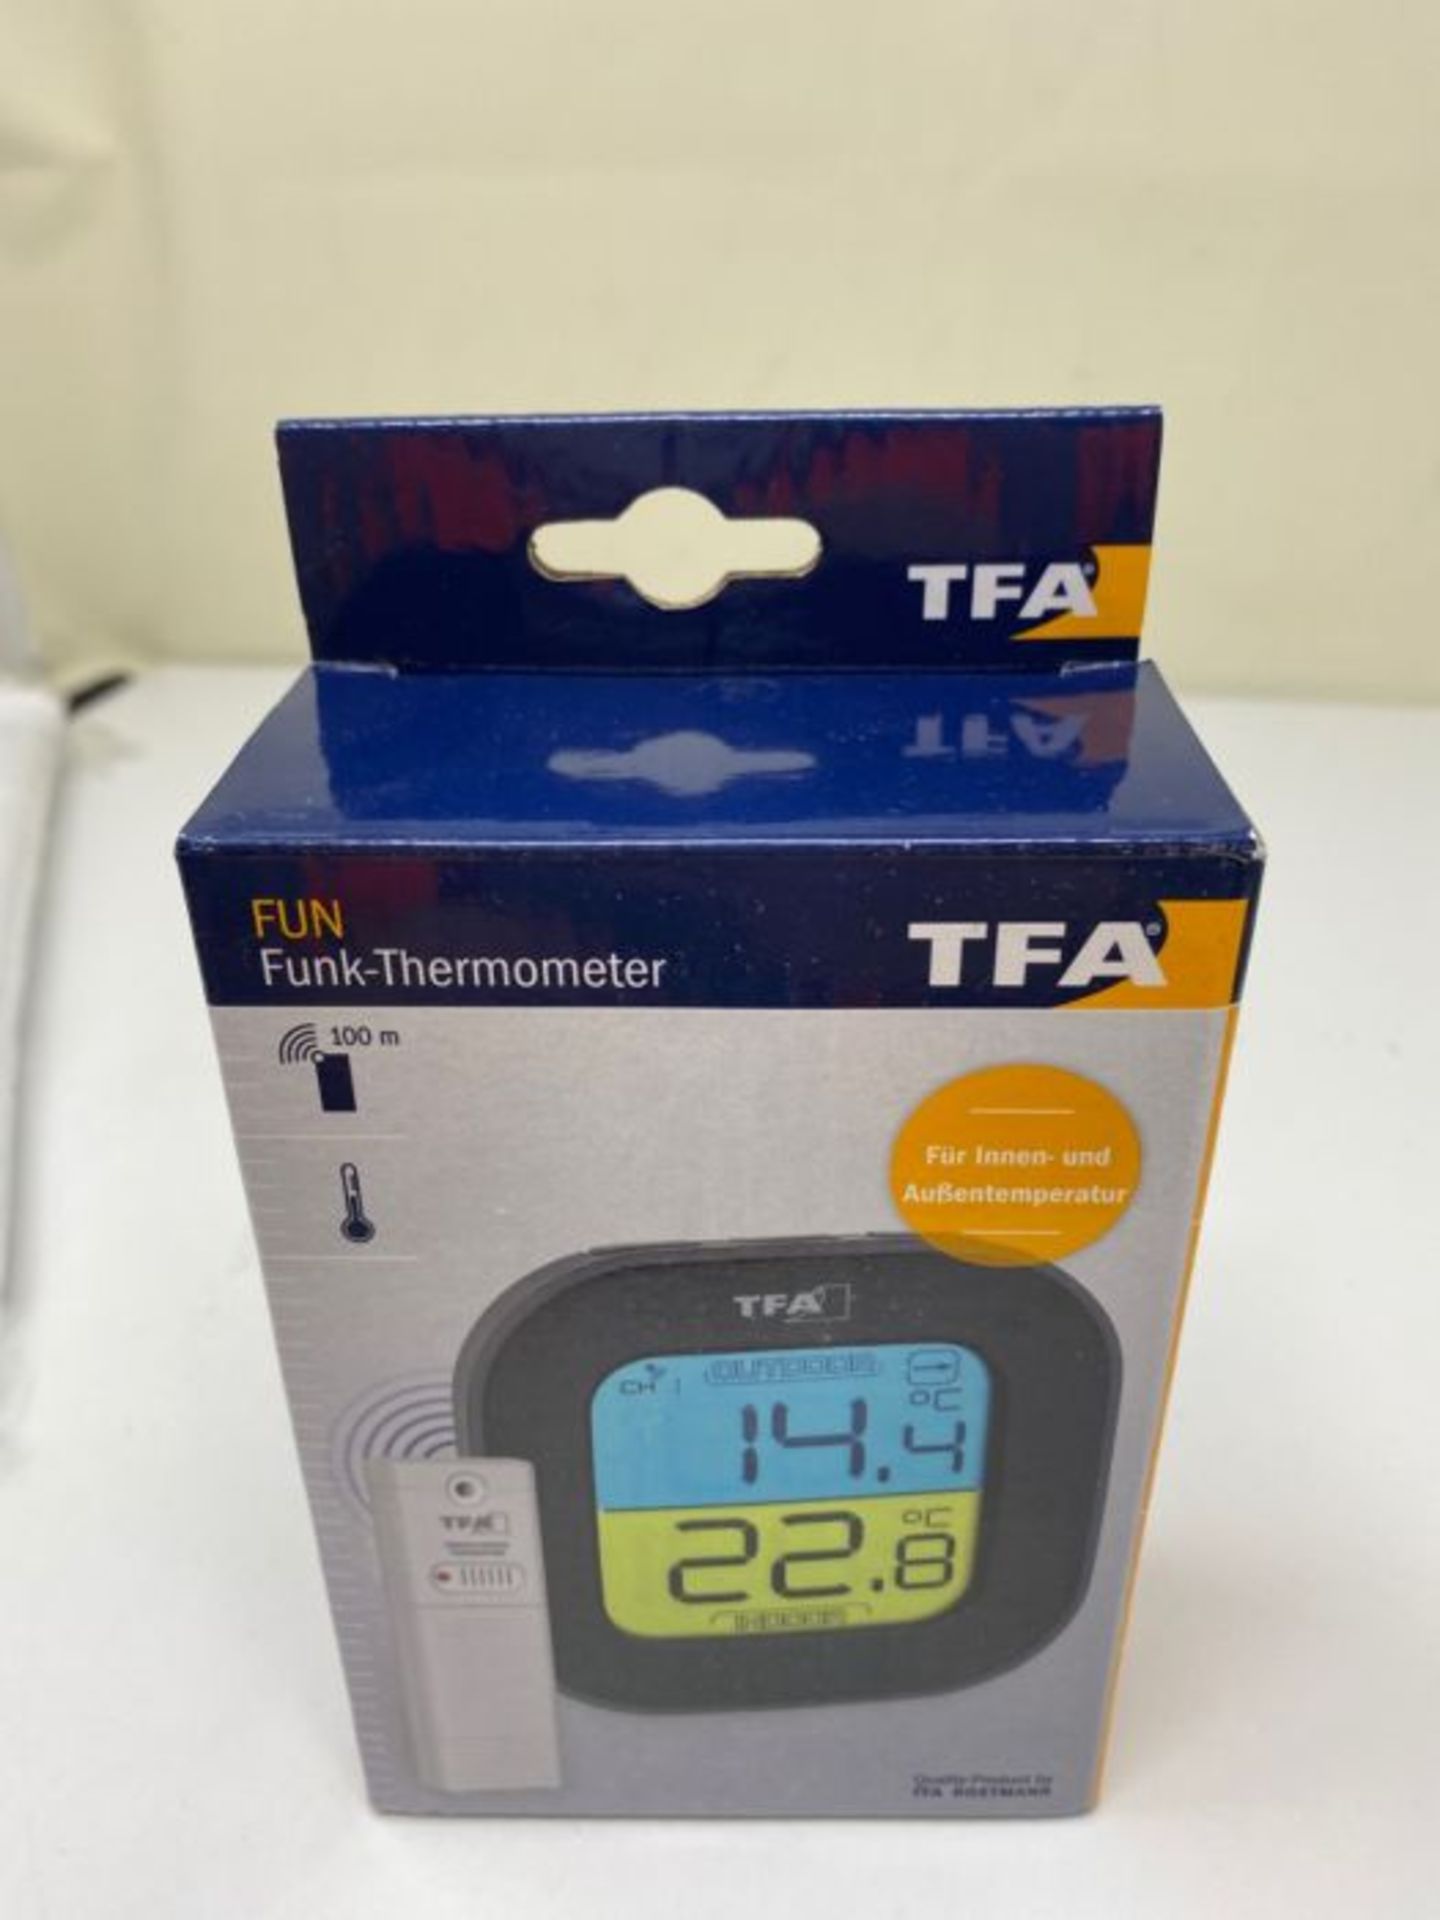 TFA Dostmann Fun Thermometer with Outdoor Sensor Wireless Indoor/Outdoor Digital Trend - Image 2 of 3